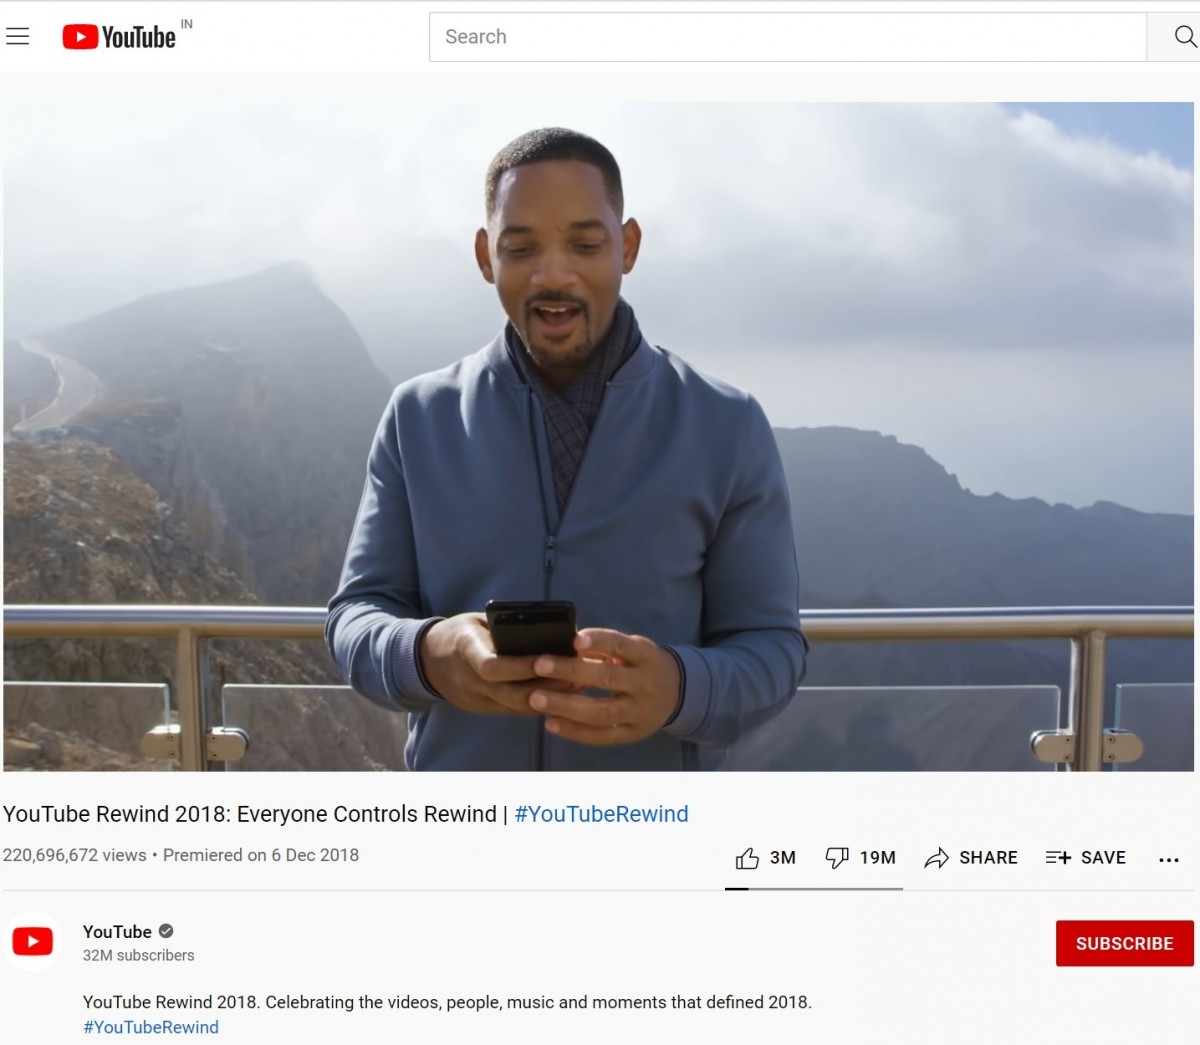 No, YouTube isn't hiding dislike counts because its YouTube Rewind 2018 is the most disliked video on the platform